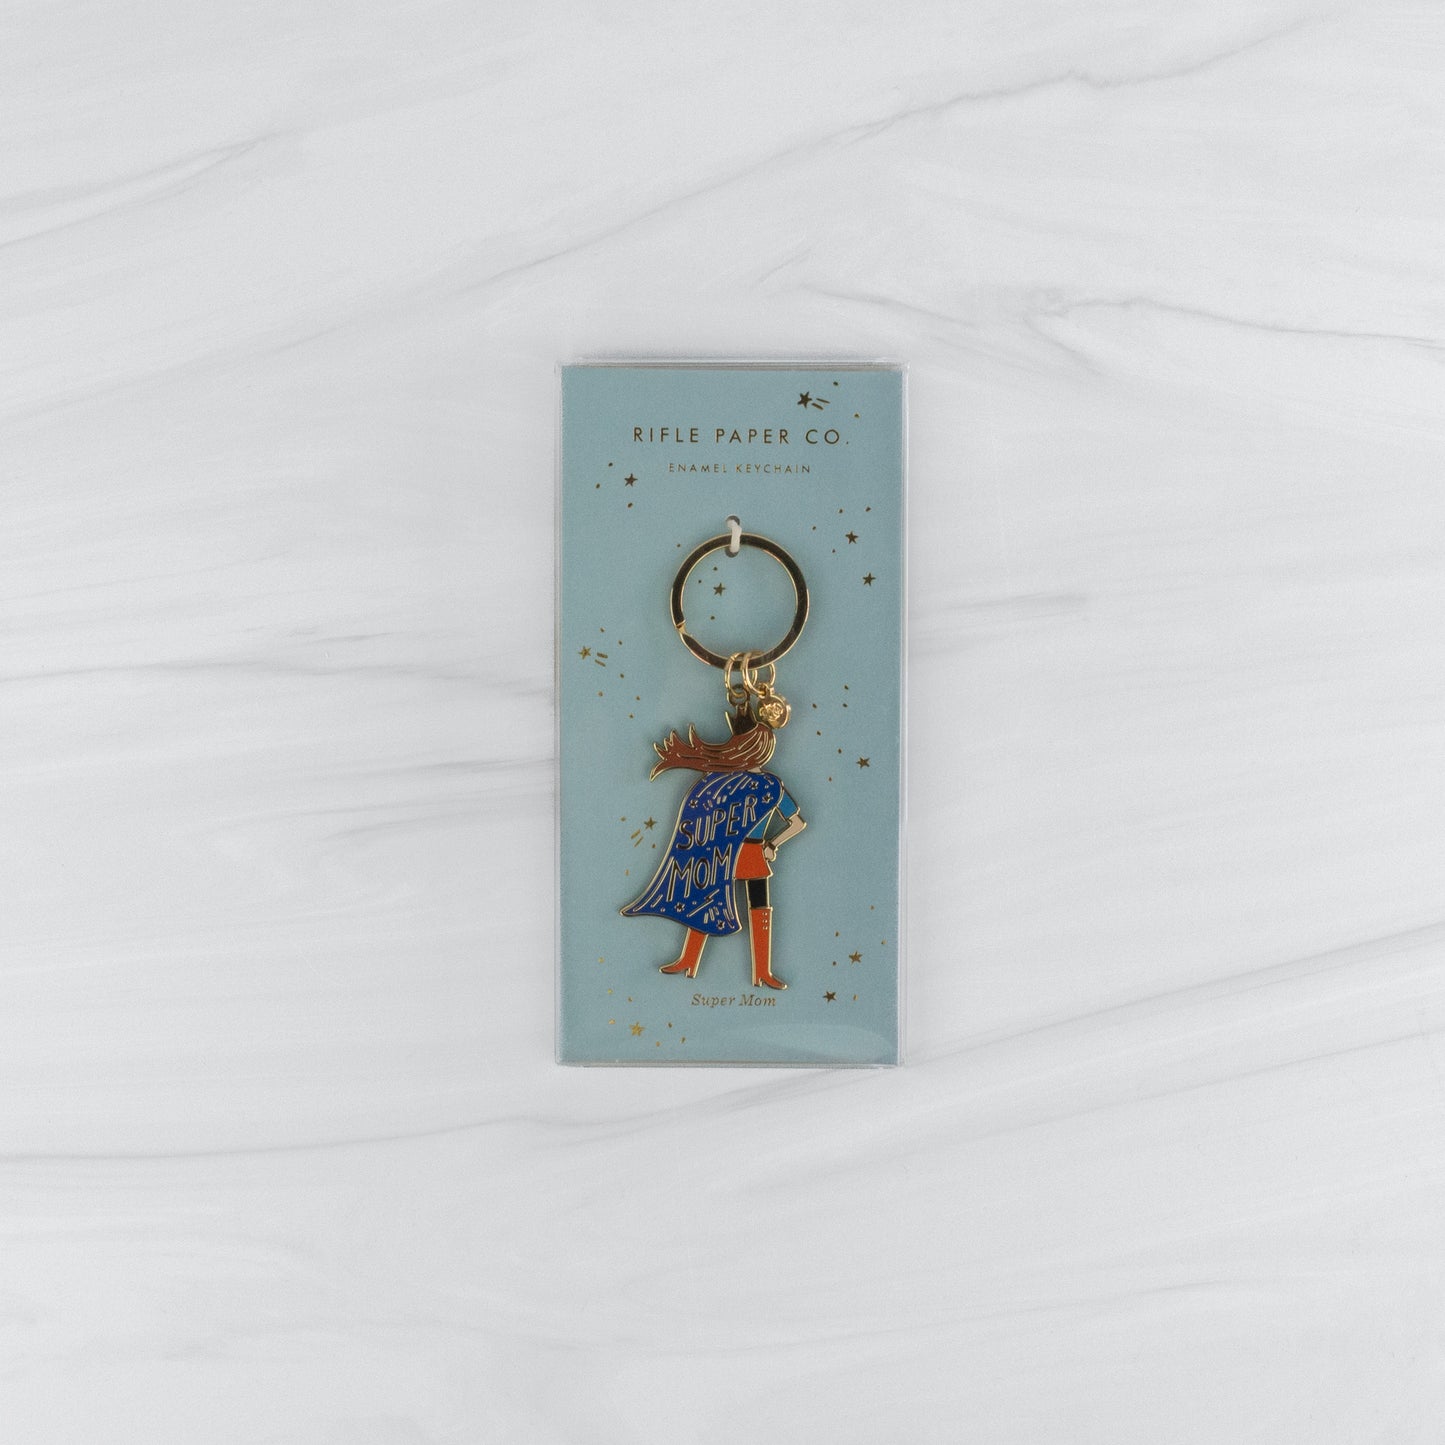 Load image into Gallery viewer, Super Mom Enamel Keychain
